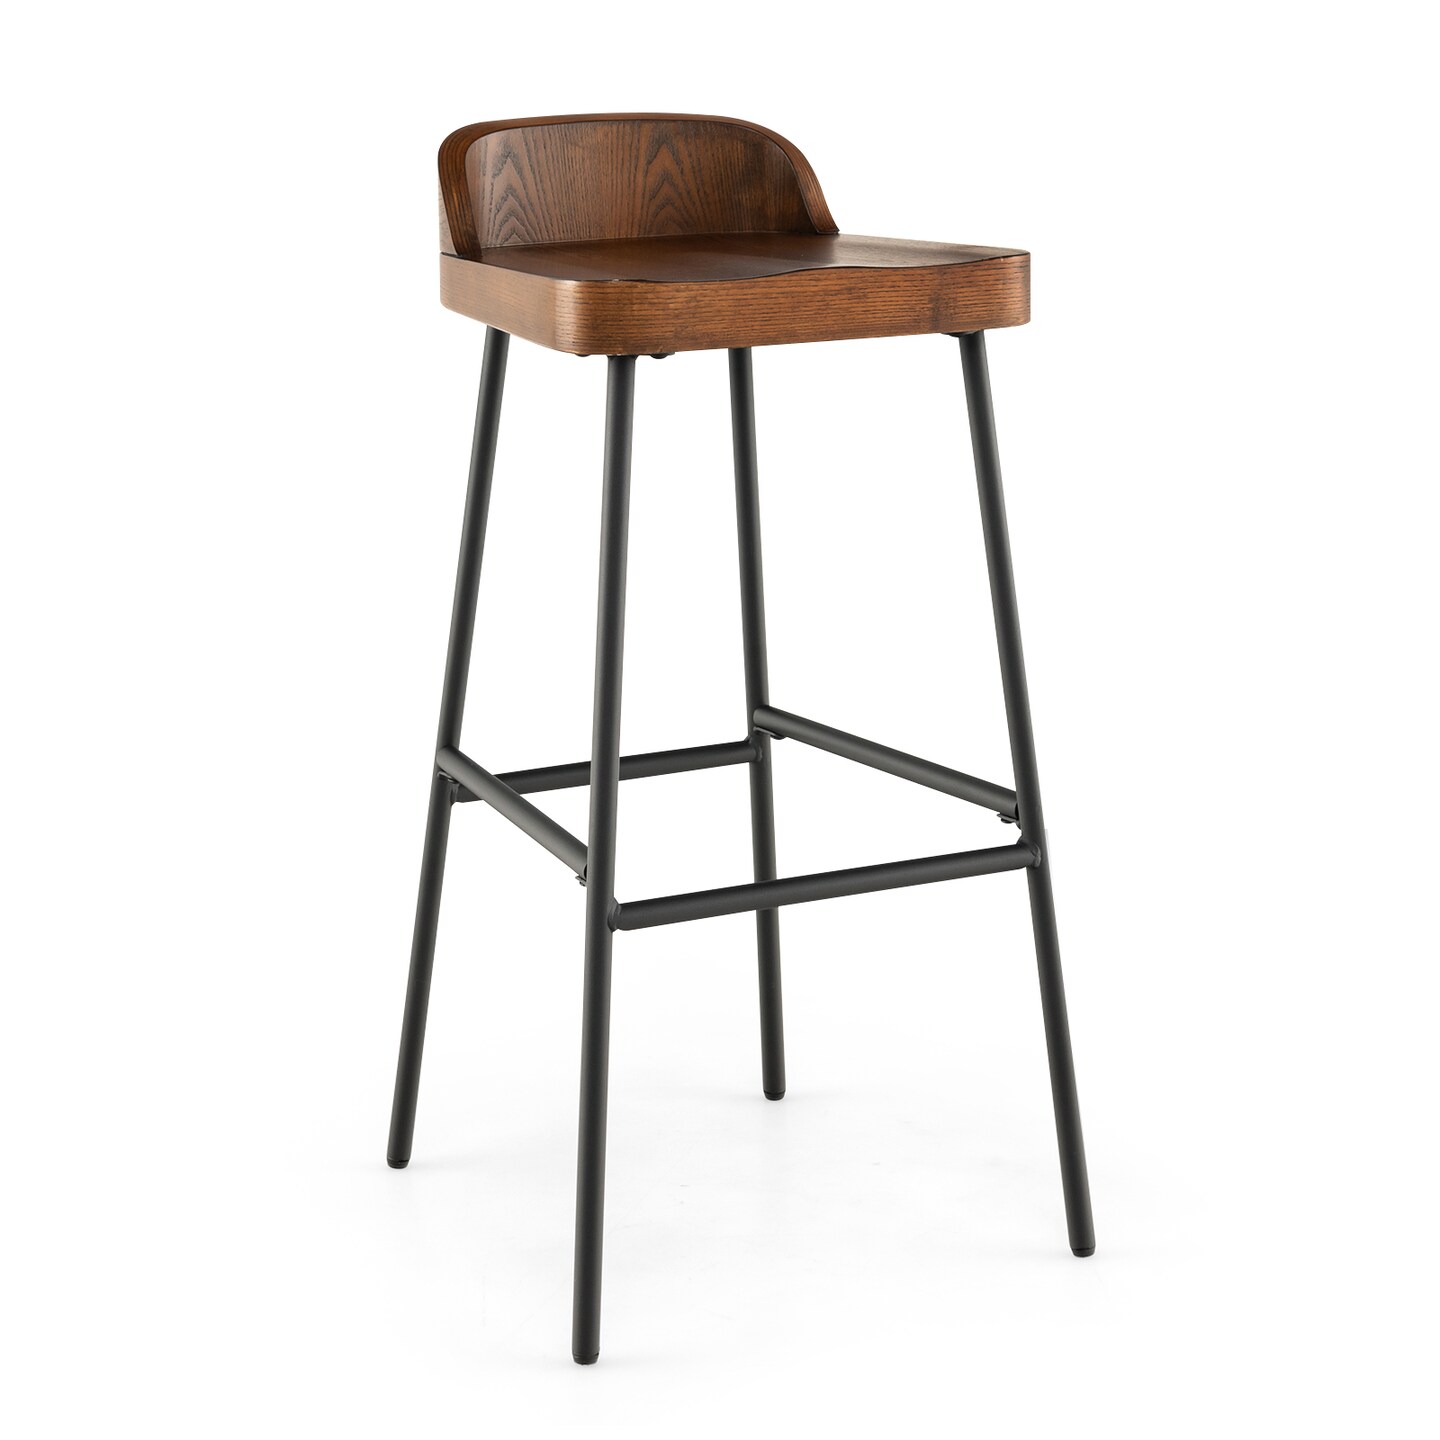 Set Of 1/2 29 Inch Industrial Bar Stools With Low Back And Footrests-1 Piece